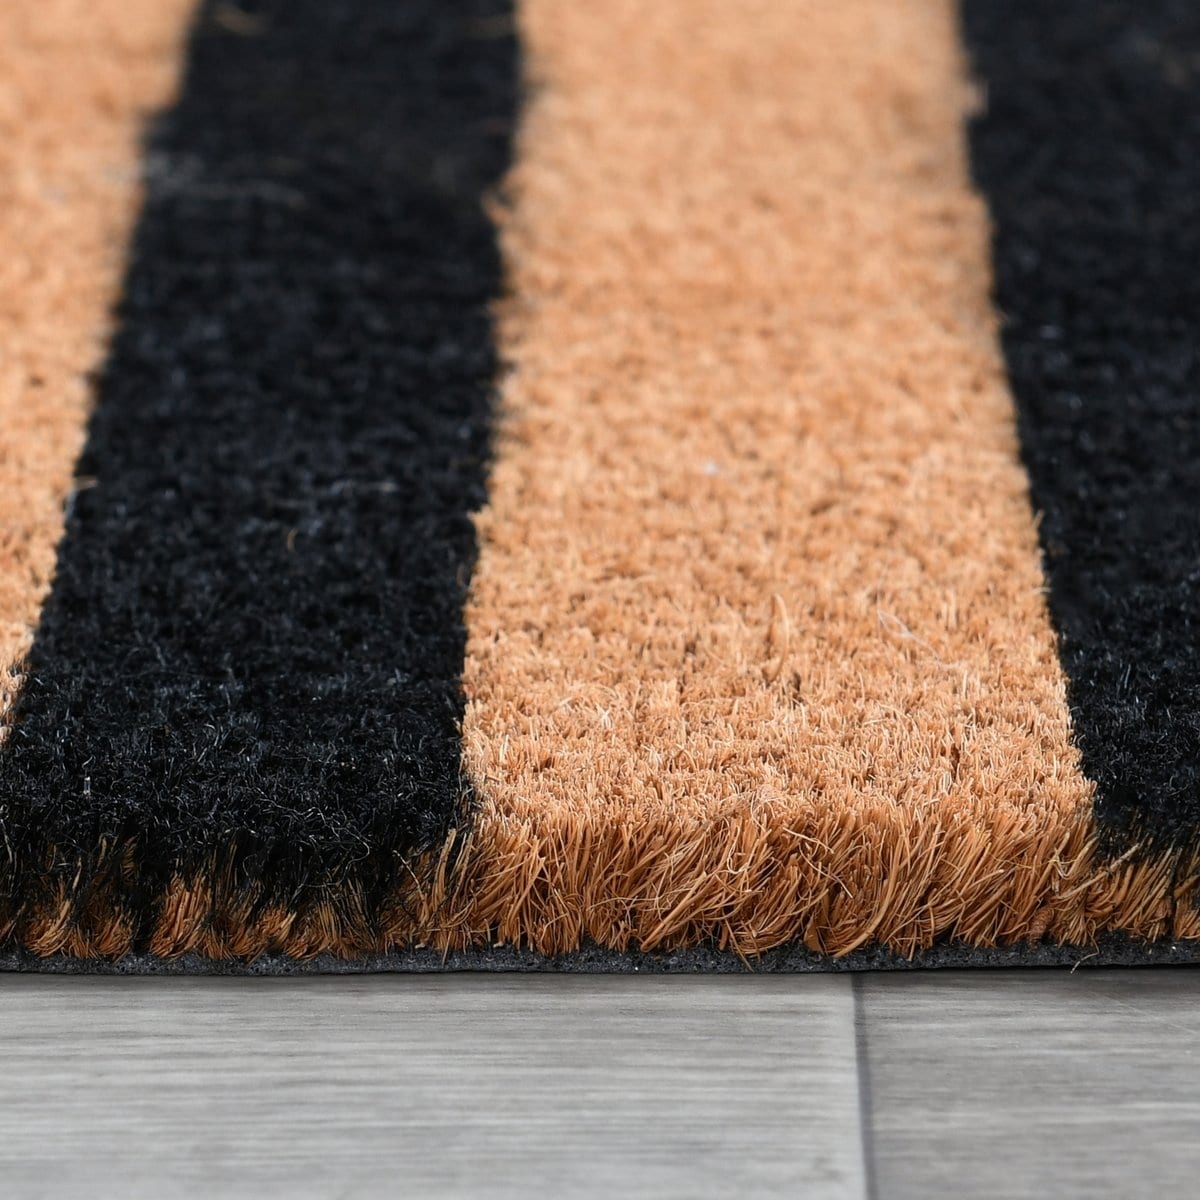 https://ak1.ostkcdn.com/images/products/is/images/direct/42a8d2e0b3825c34d9afe127d11ba5cd95eb5159/Striped-Black-and-Natural-24x57-Doormat-by-Kosas-Home.jpg